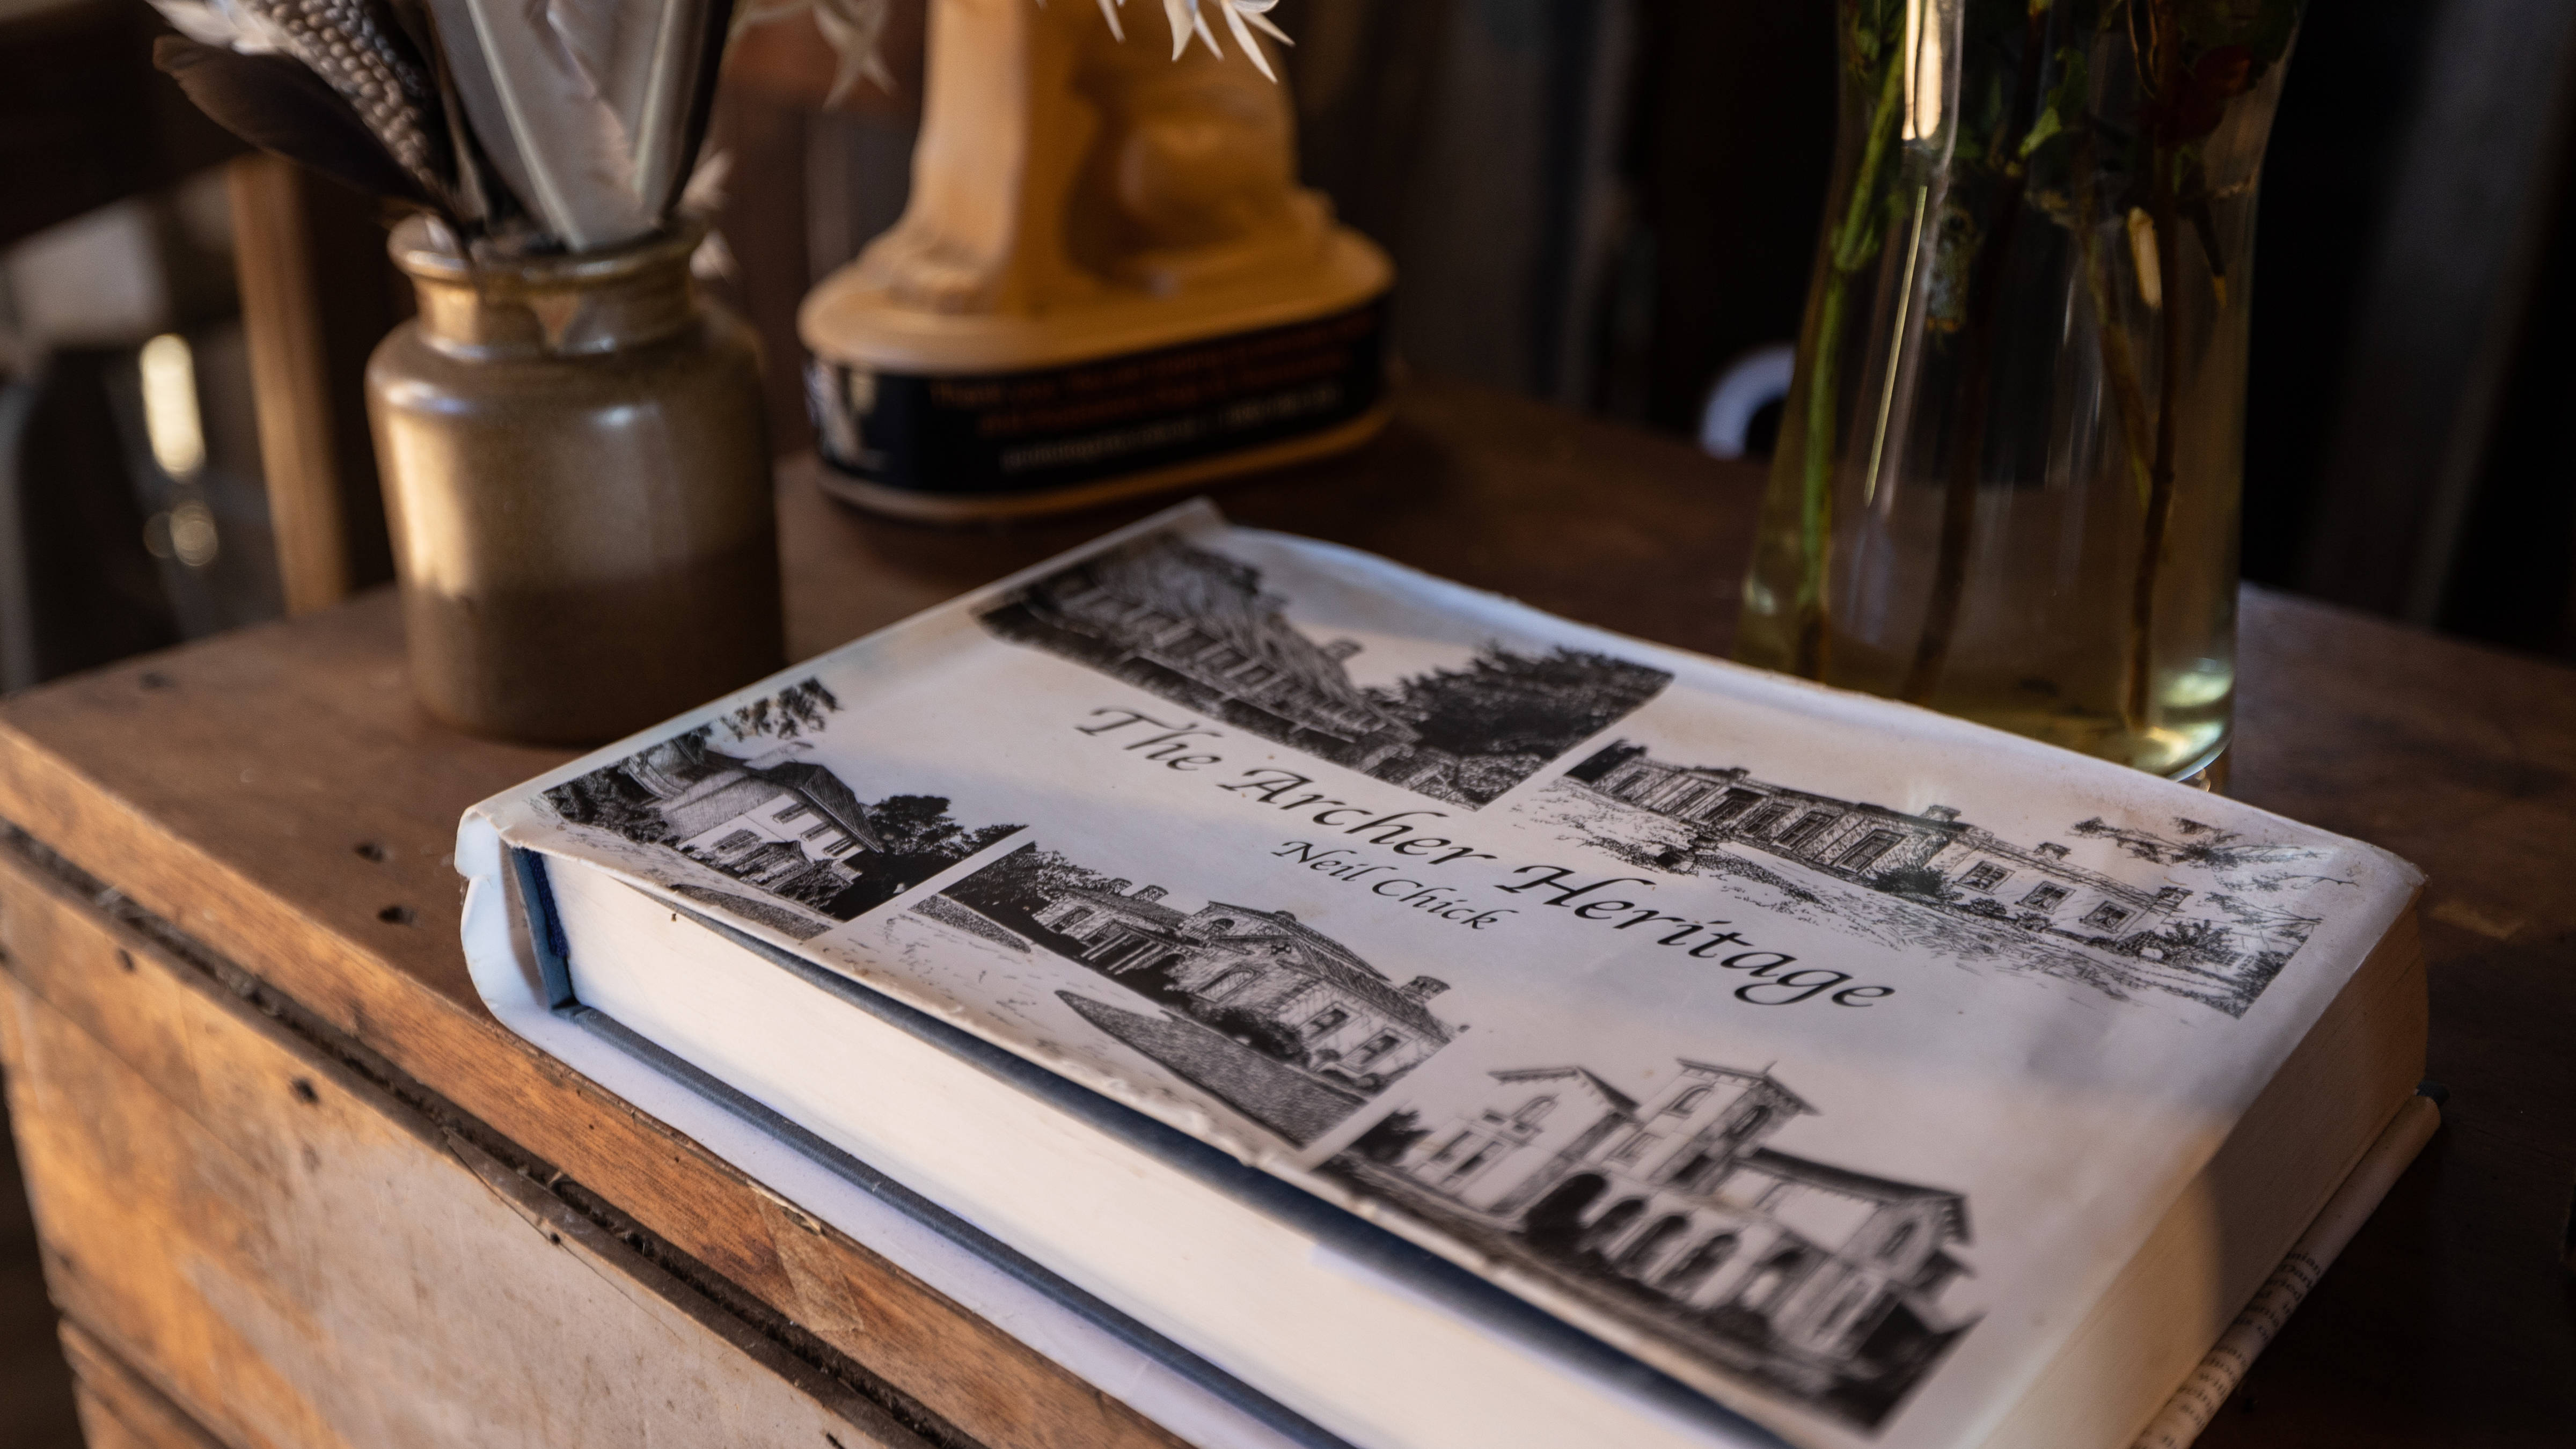 The Archer Heritage book was first published as The Archers of Van Diemen’s Land in 1991 and updated in 2018. The dust cover features the four houses of the original Archer brothers, Woolmers,Brickendon, Panshanger and Northbury. Photo: Kate von Stieglitz / Tourism Australia.